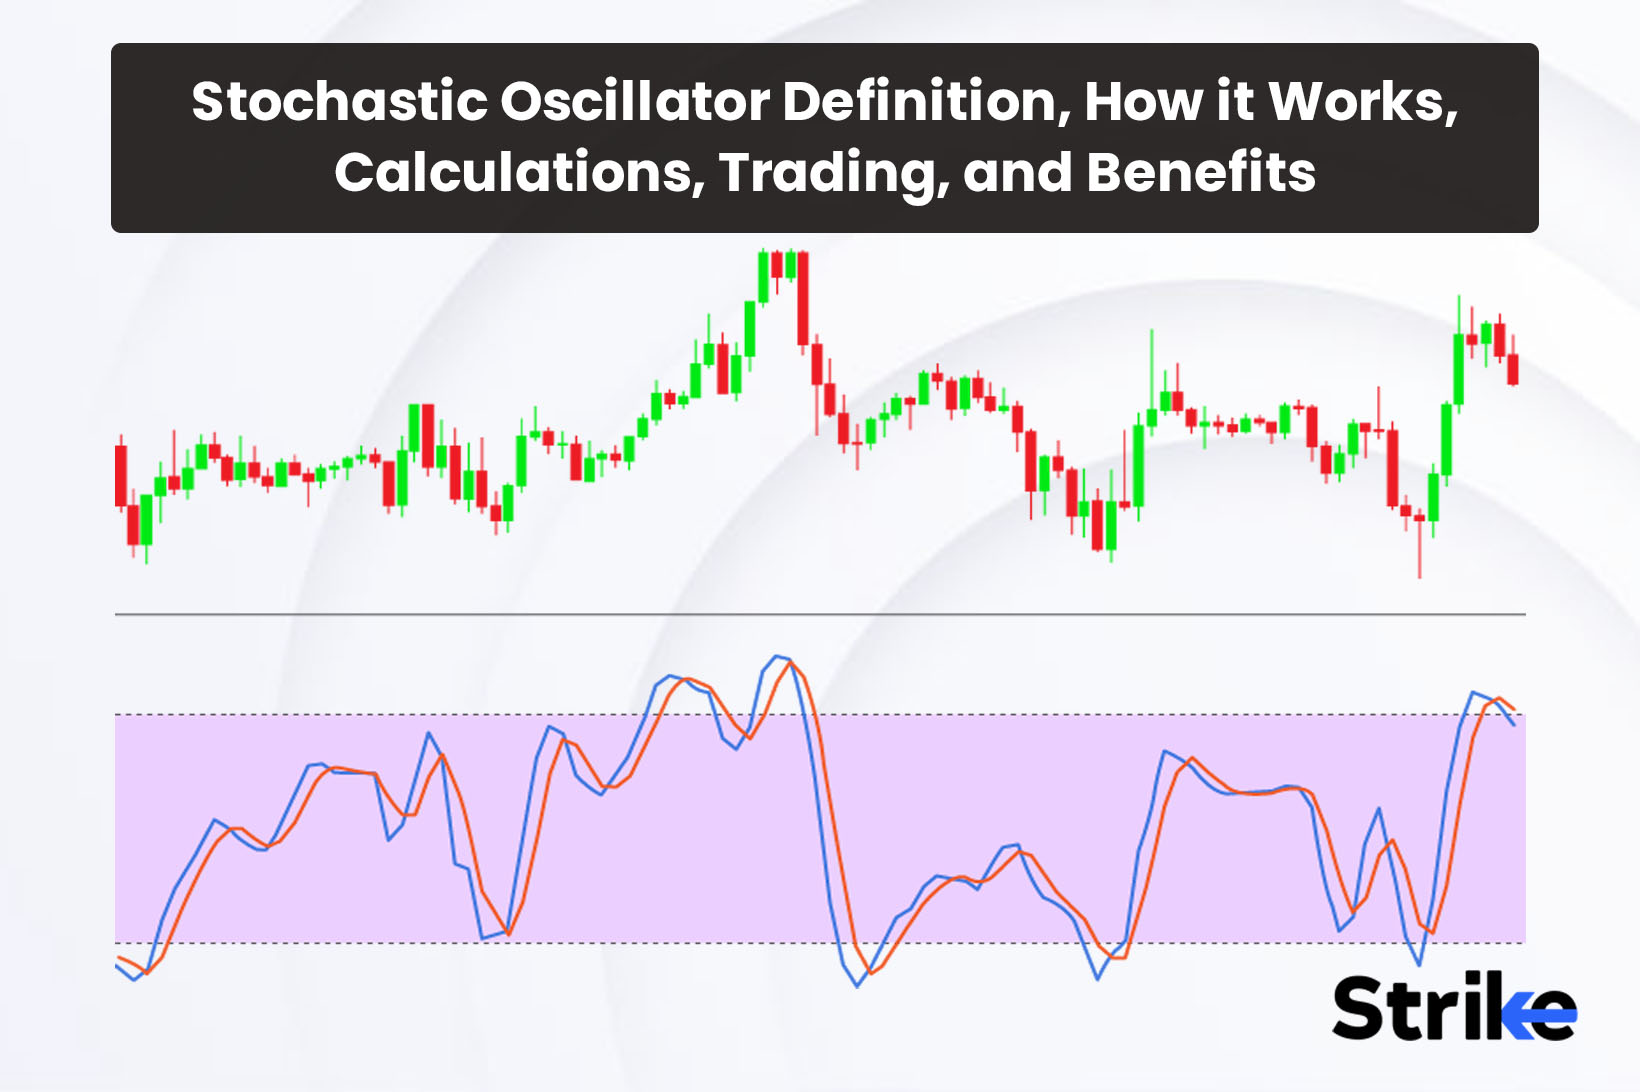 Stochastic Oscillator: Definition, How it Works, Calculations, Trading, and Benefits